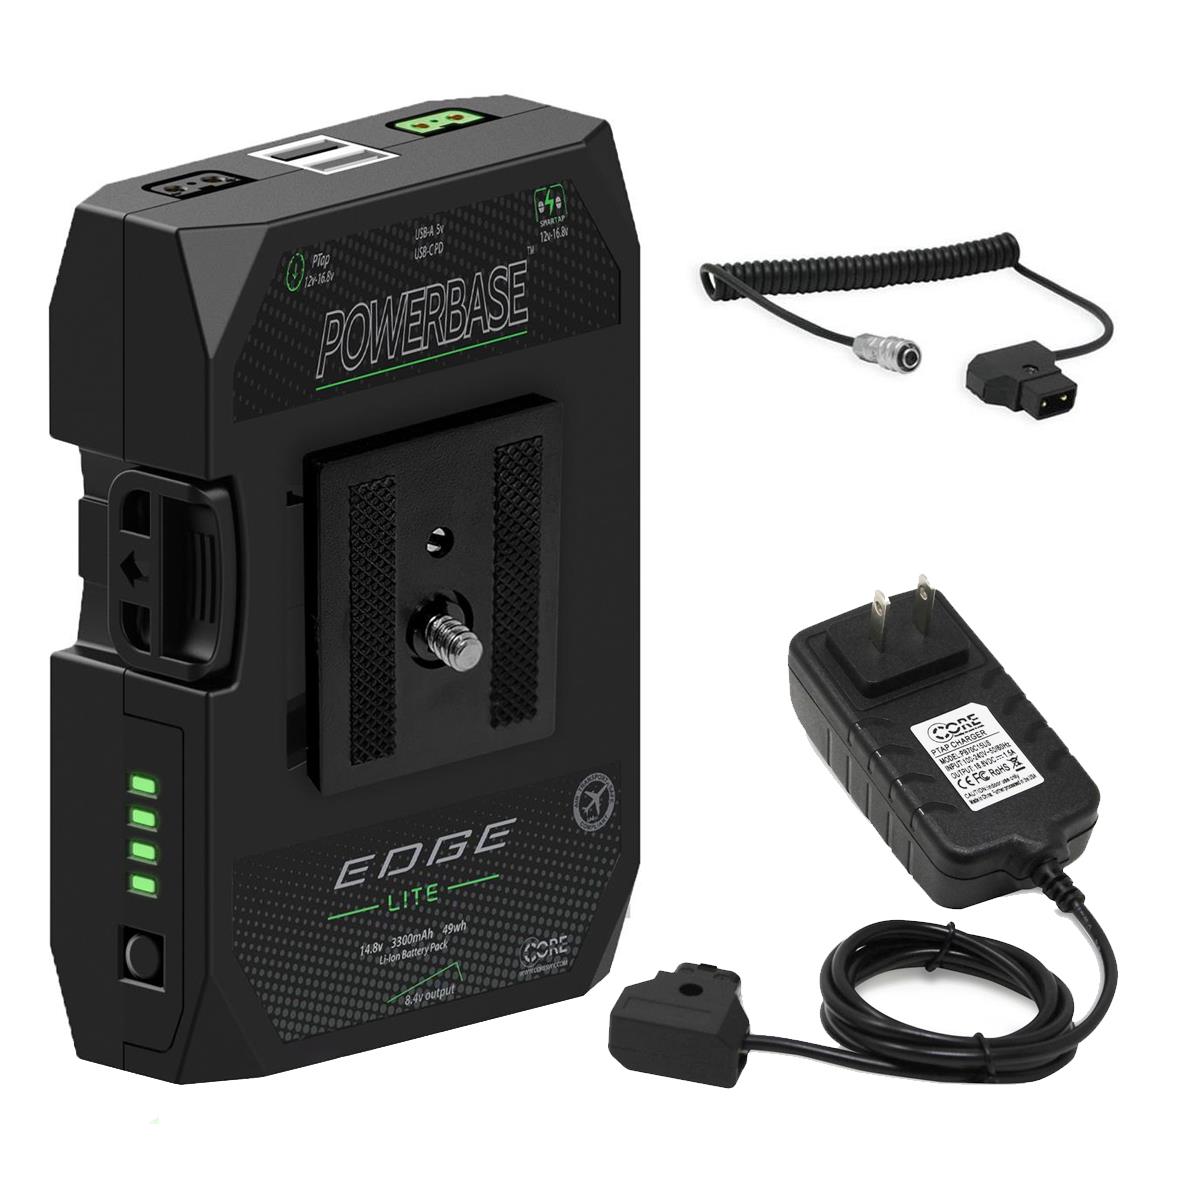 Core SWX PowerBase Edge Lite 49Wh Battery Pack w/Charger, Cable for Blackmagic -  PBE-LITE B